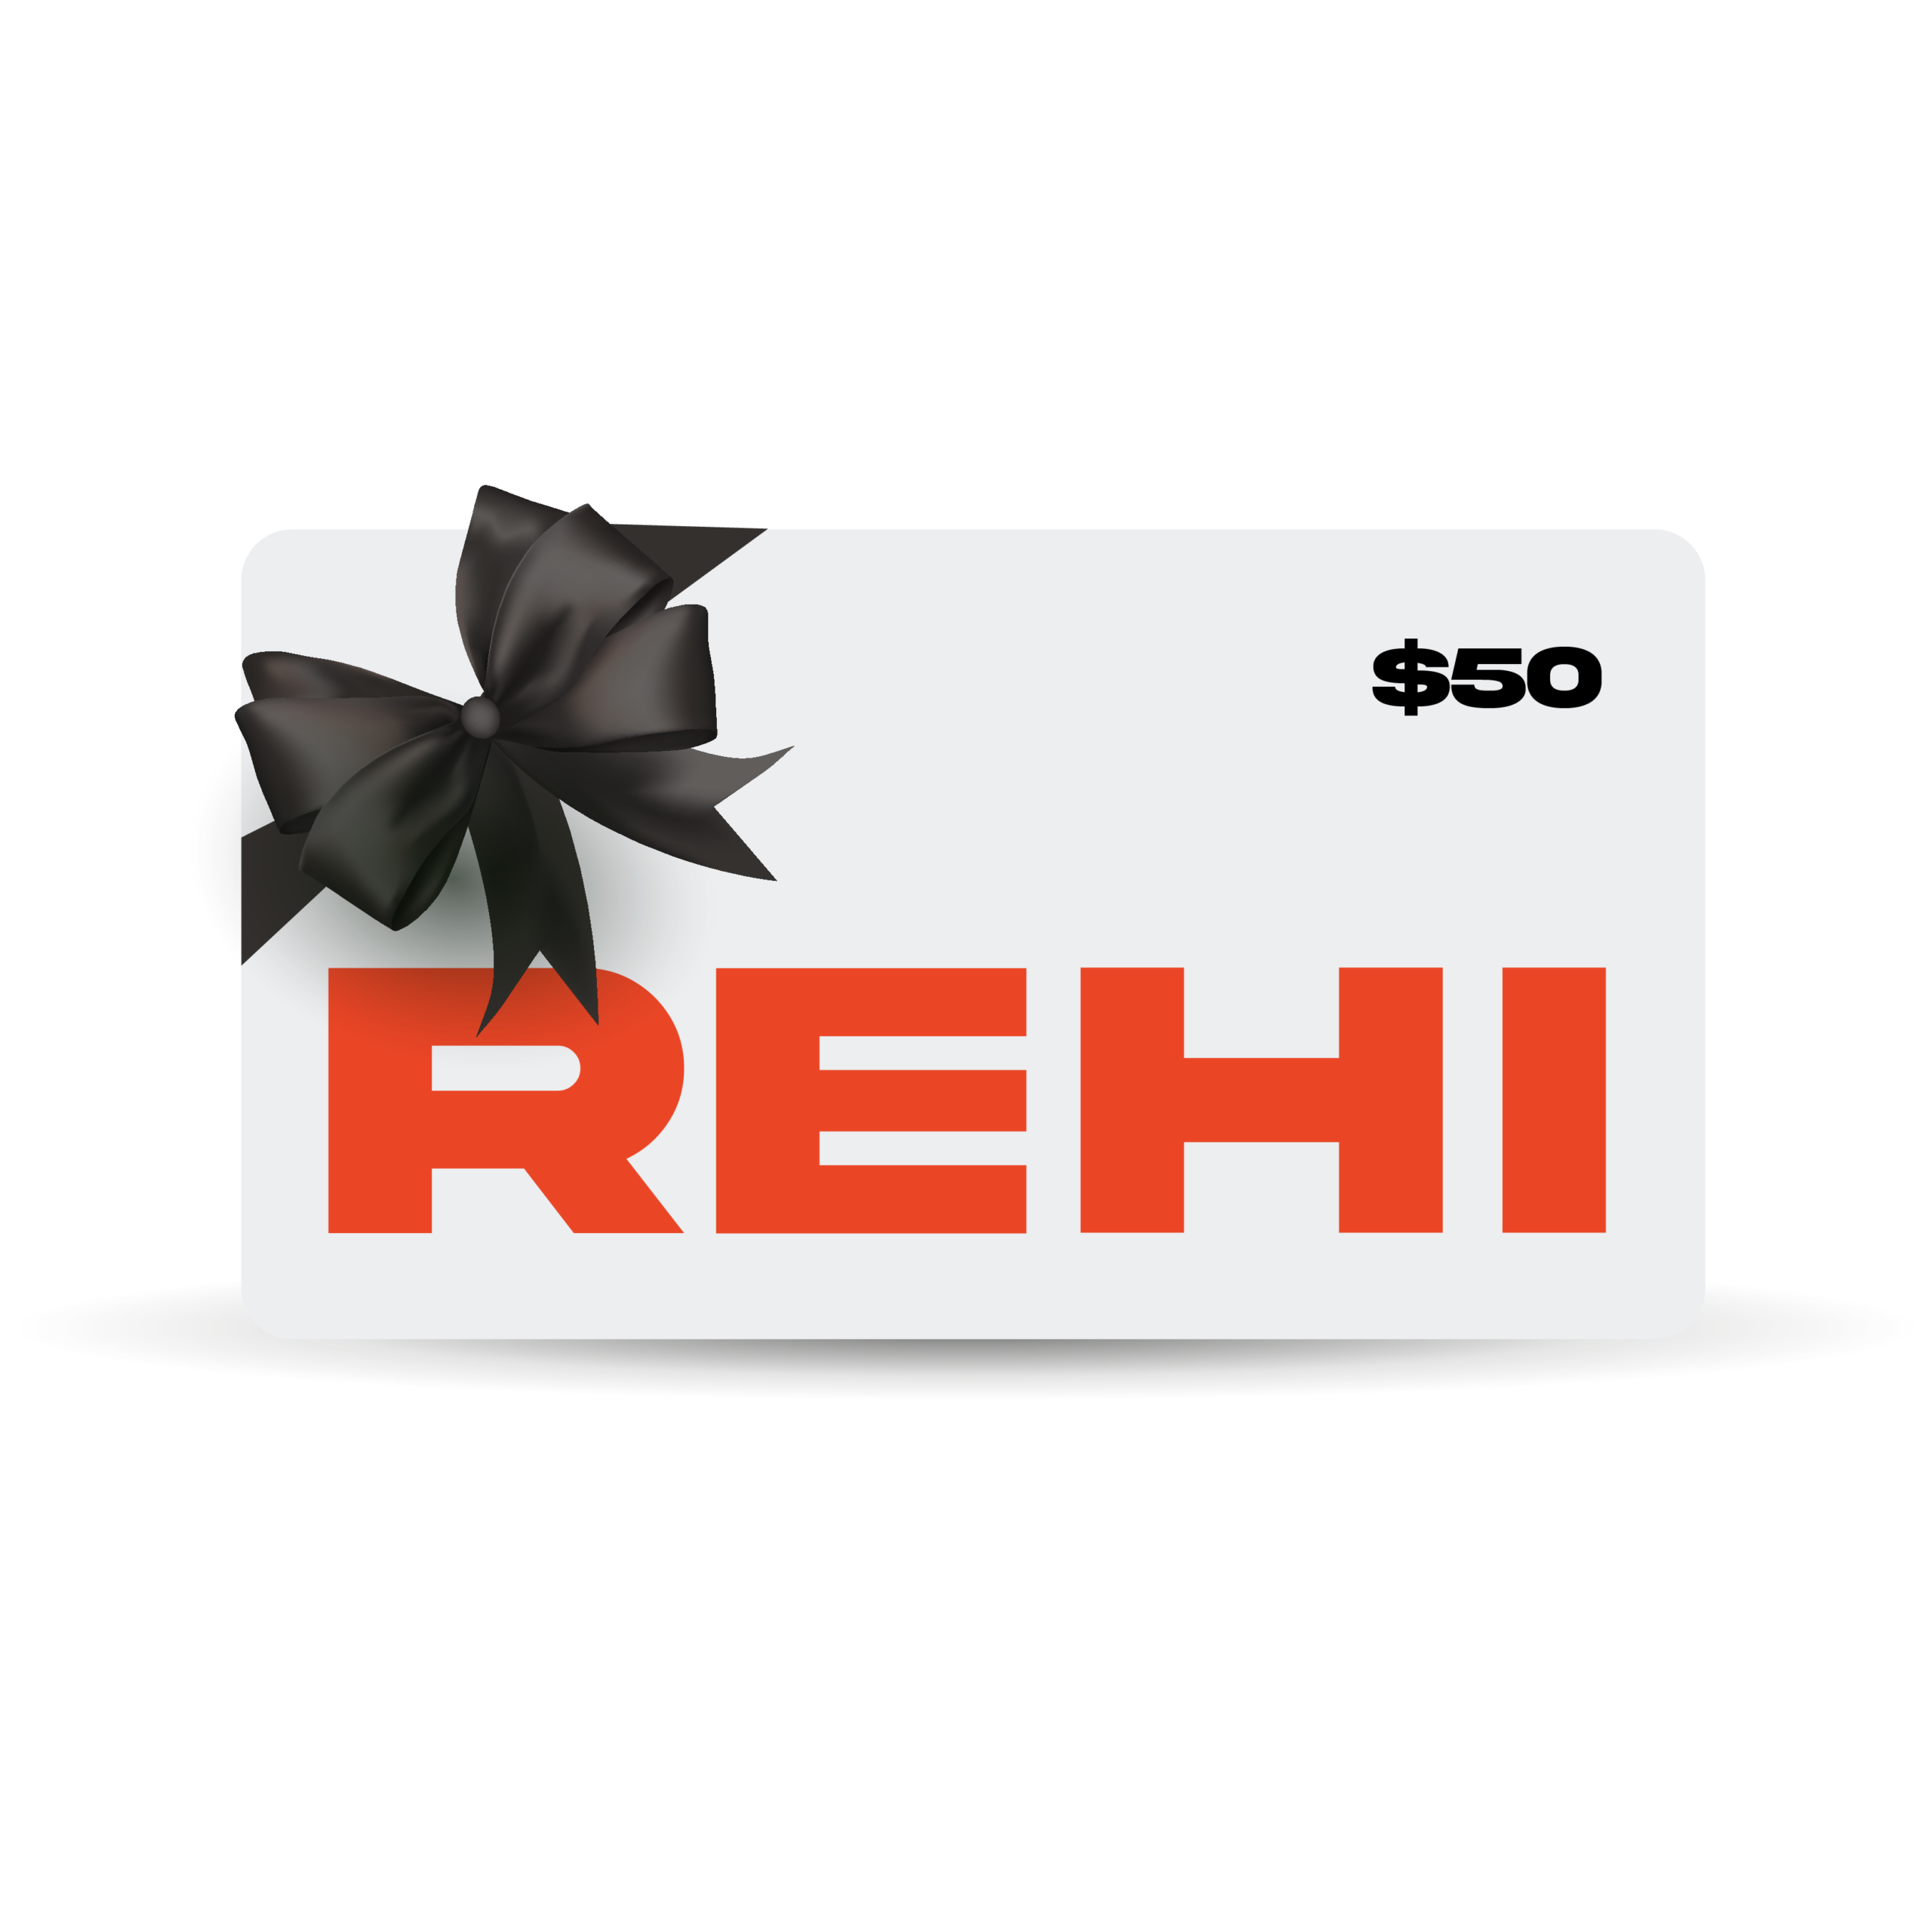 attribute_gift-card-amount: $50